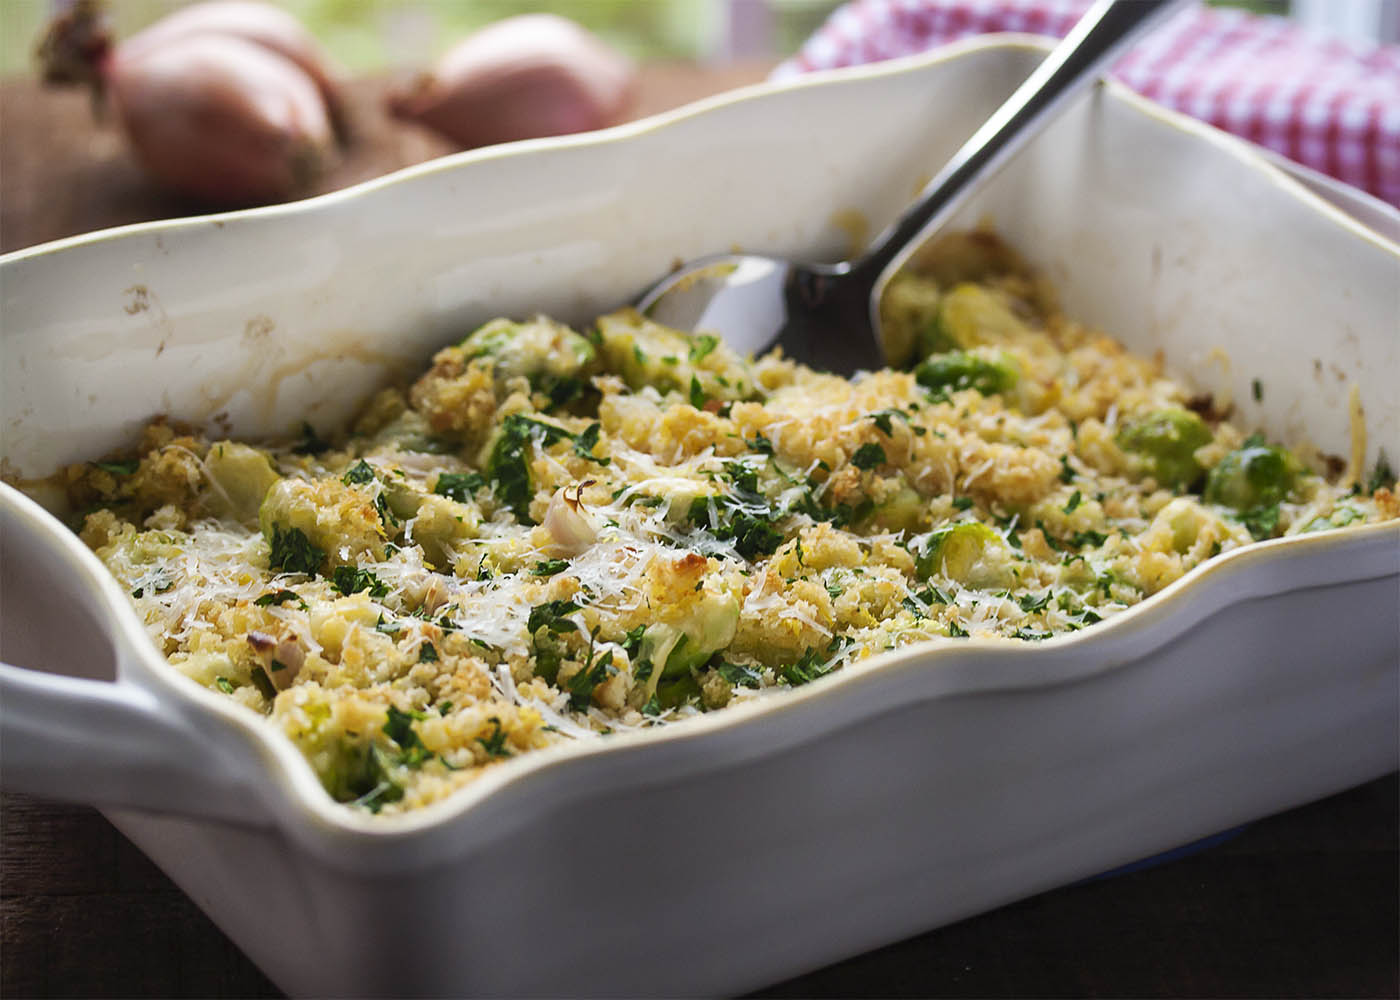 Easy Brussels Sprout and Shallot Gratin - In this brussel sprout gratin, brussel sprouts and shallots are roasted right in the casserole dish and then topped with cheese and breadcrumbs to make for an easy and light gratin. | justalittlebitofbacon.com